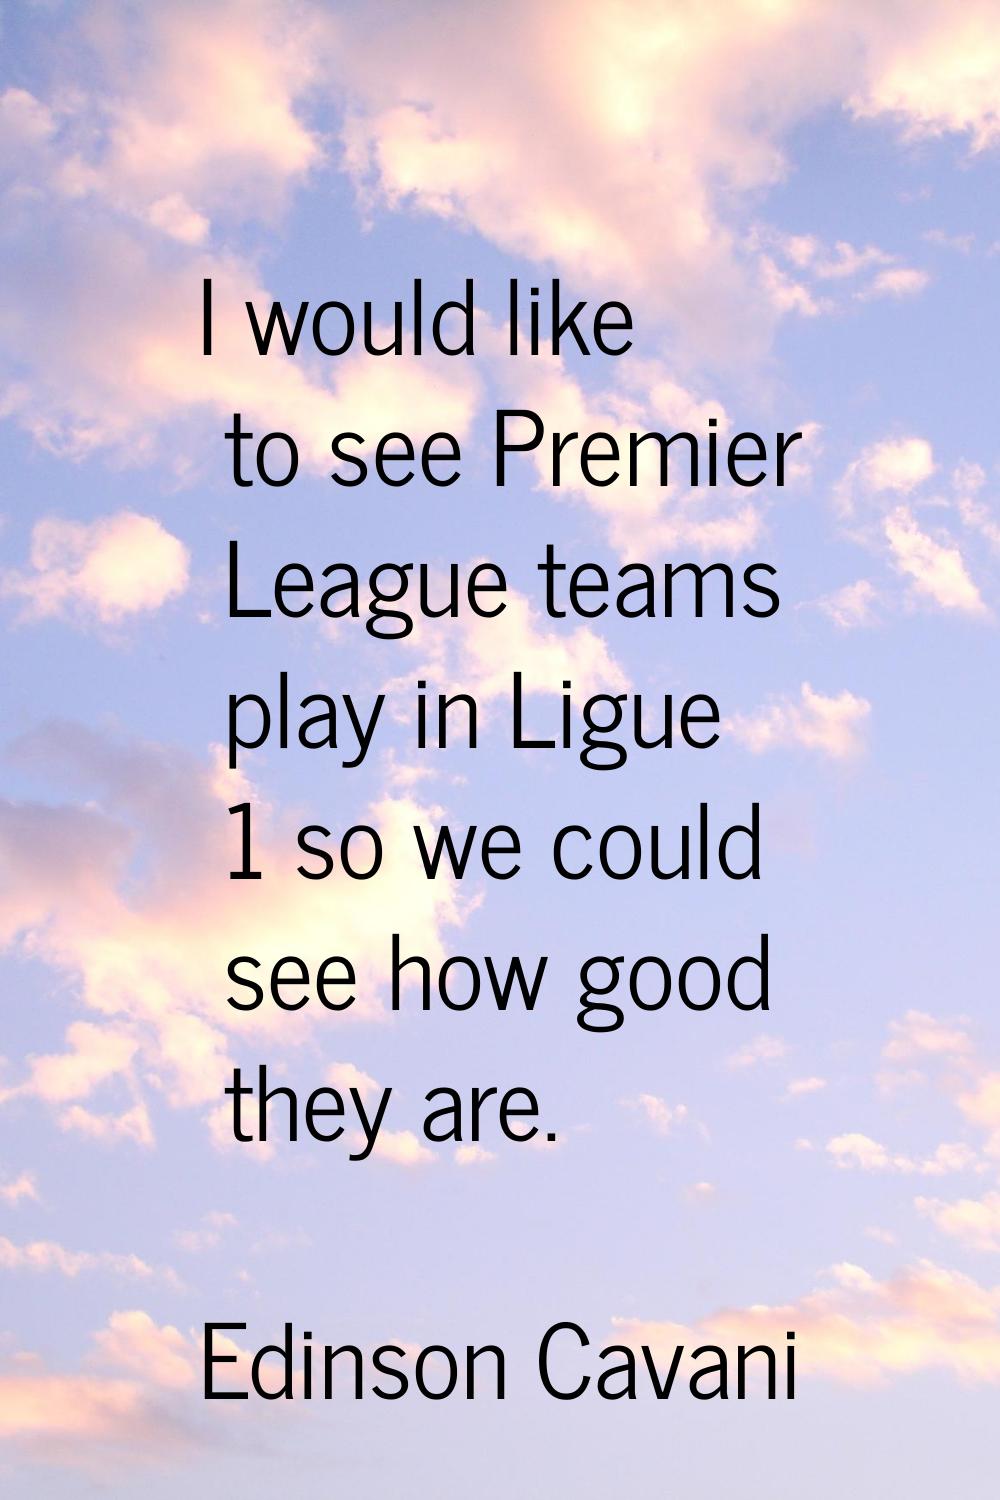 I would like to see Premier League teams play in Ligue 1 so we could see how good they are.